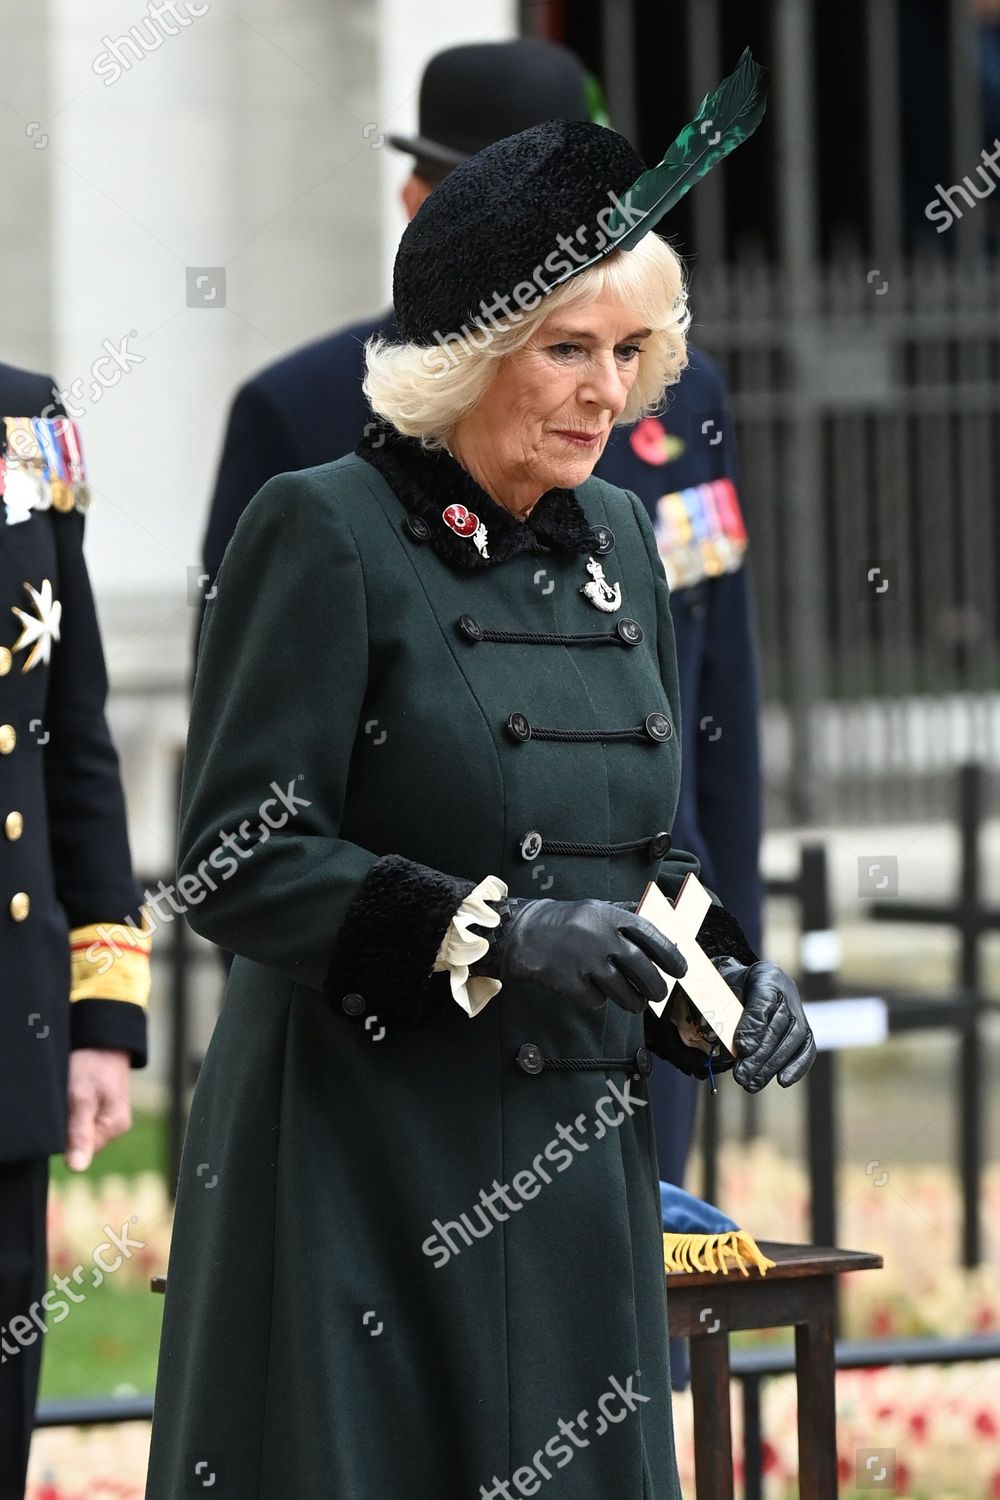 camilla-duchess-of-cornwall-attends-92nd-field-of-remembrance-at-westminster-abbey-london-uk-shutterstock-editorial-10995712n.jpg